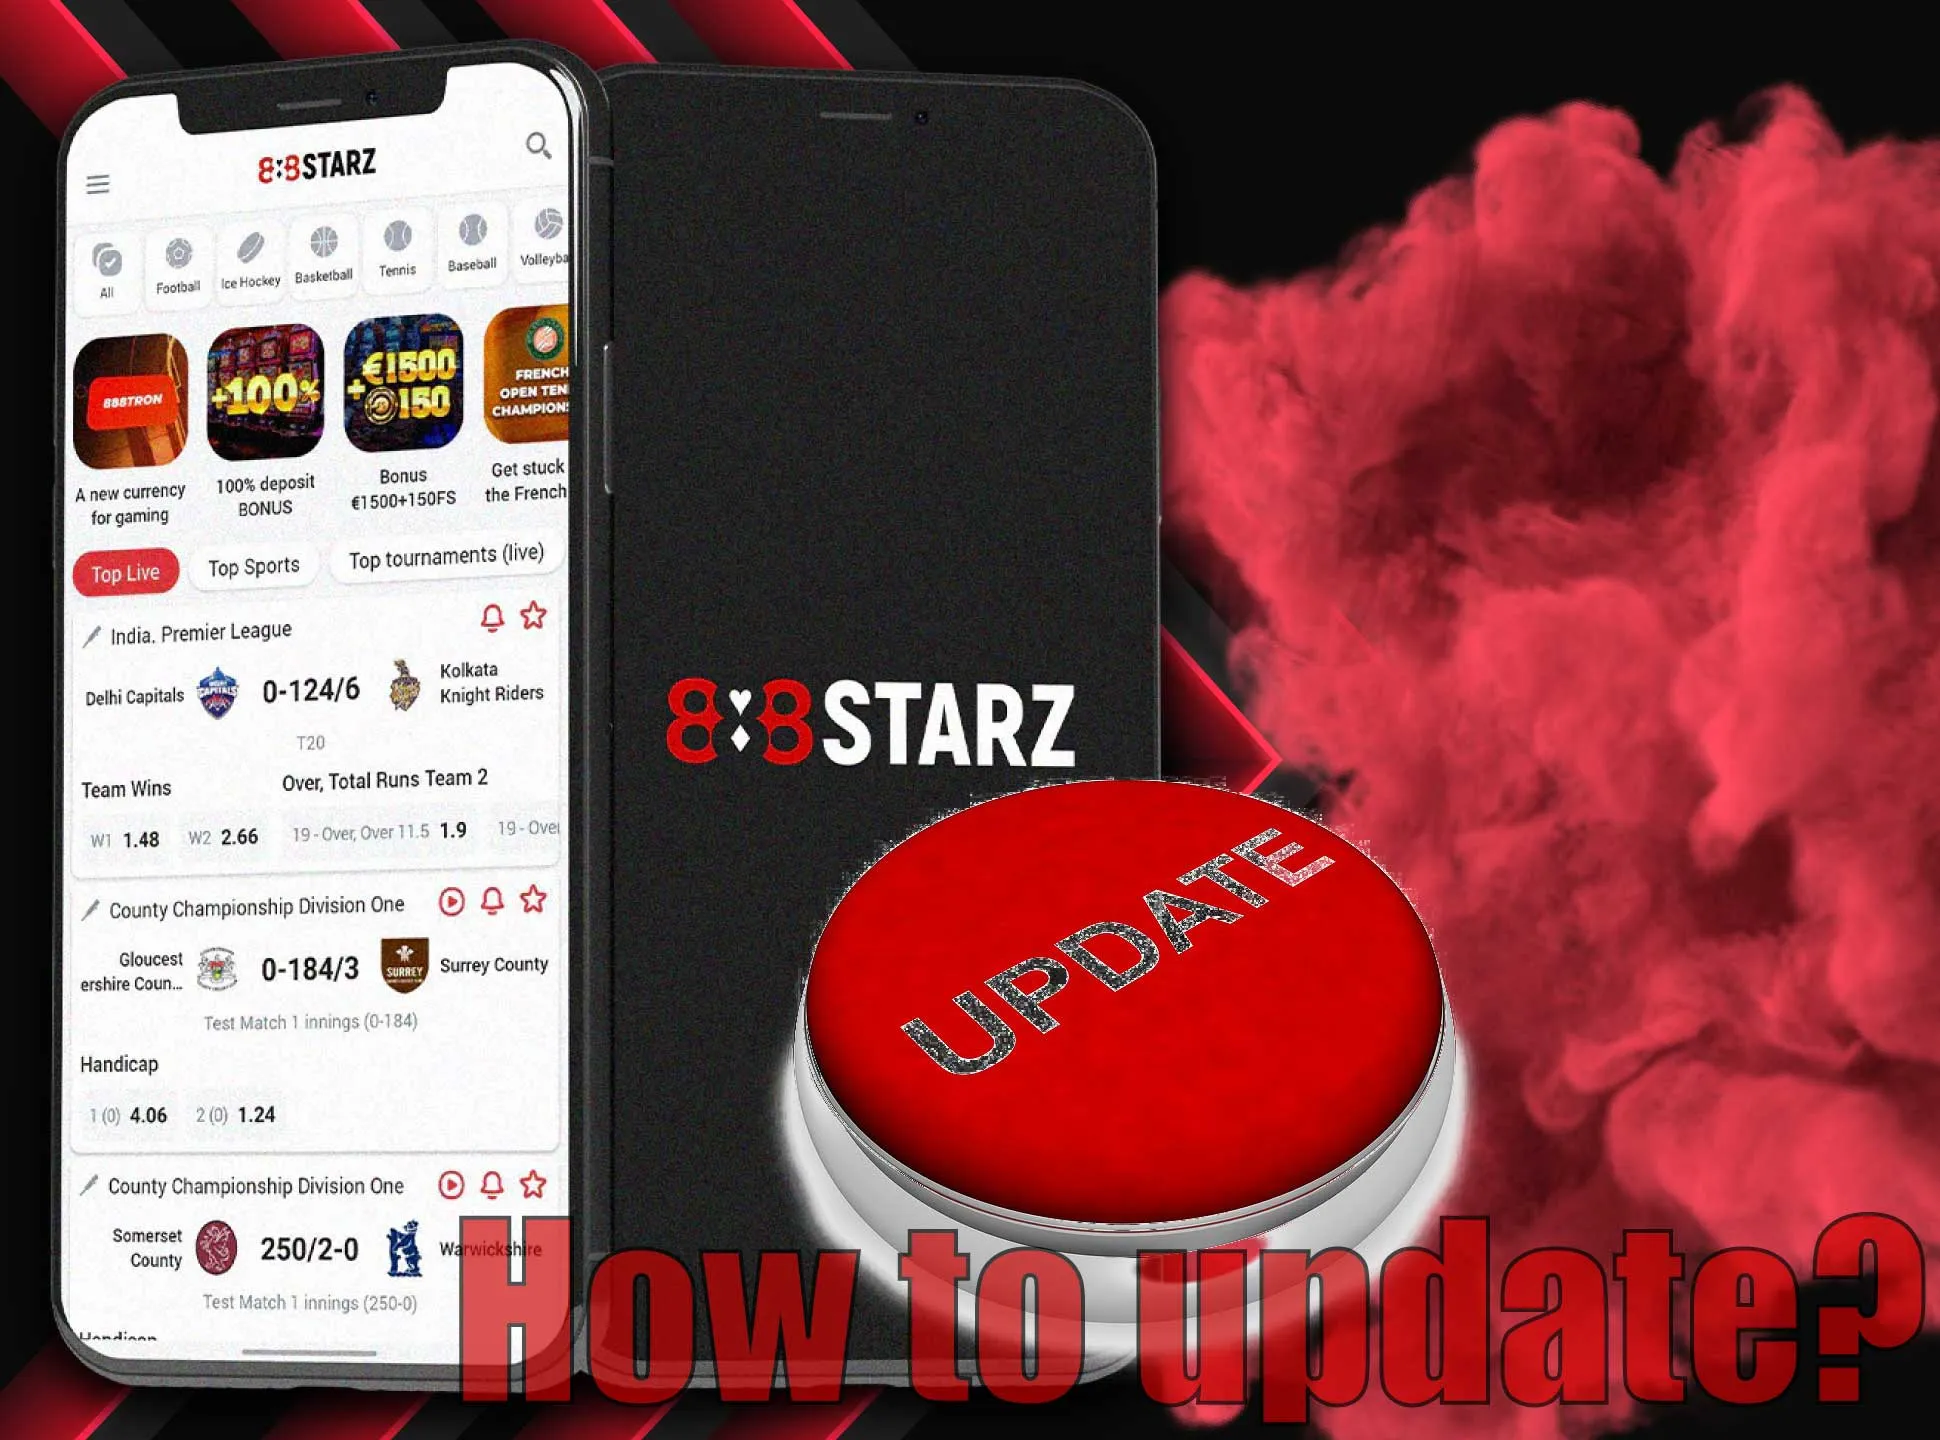 Update the 888starz app to get an actual version.